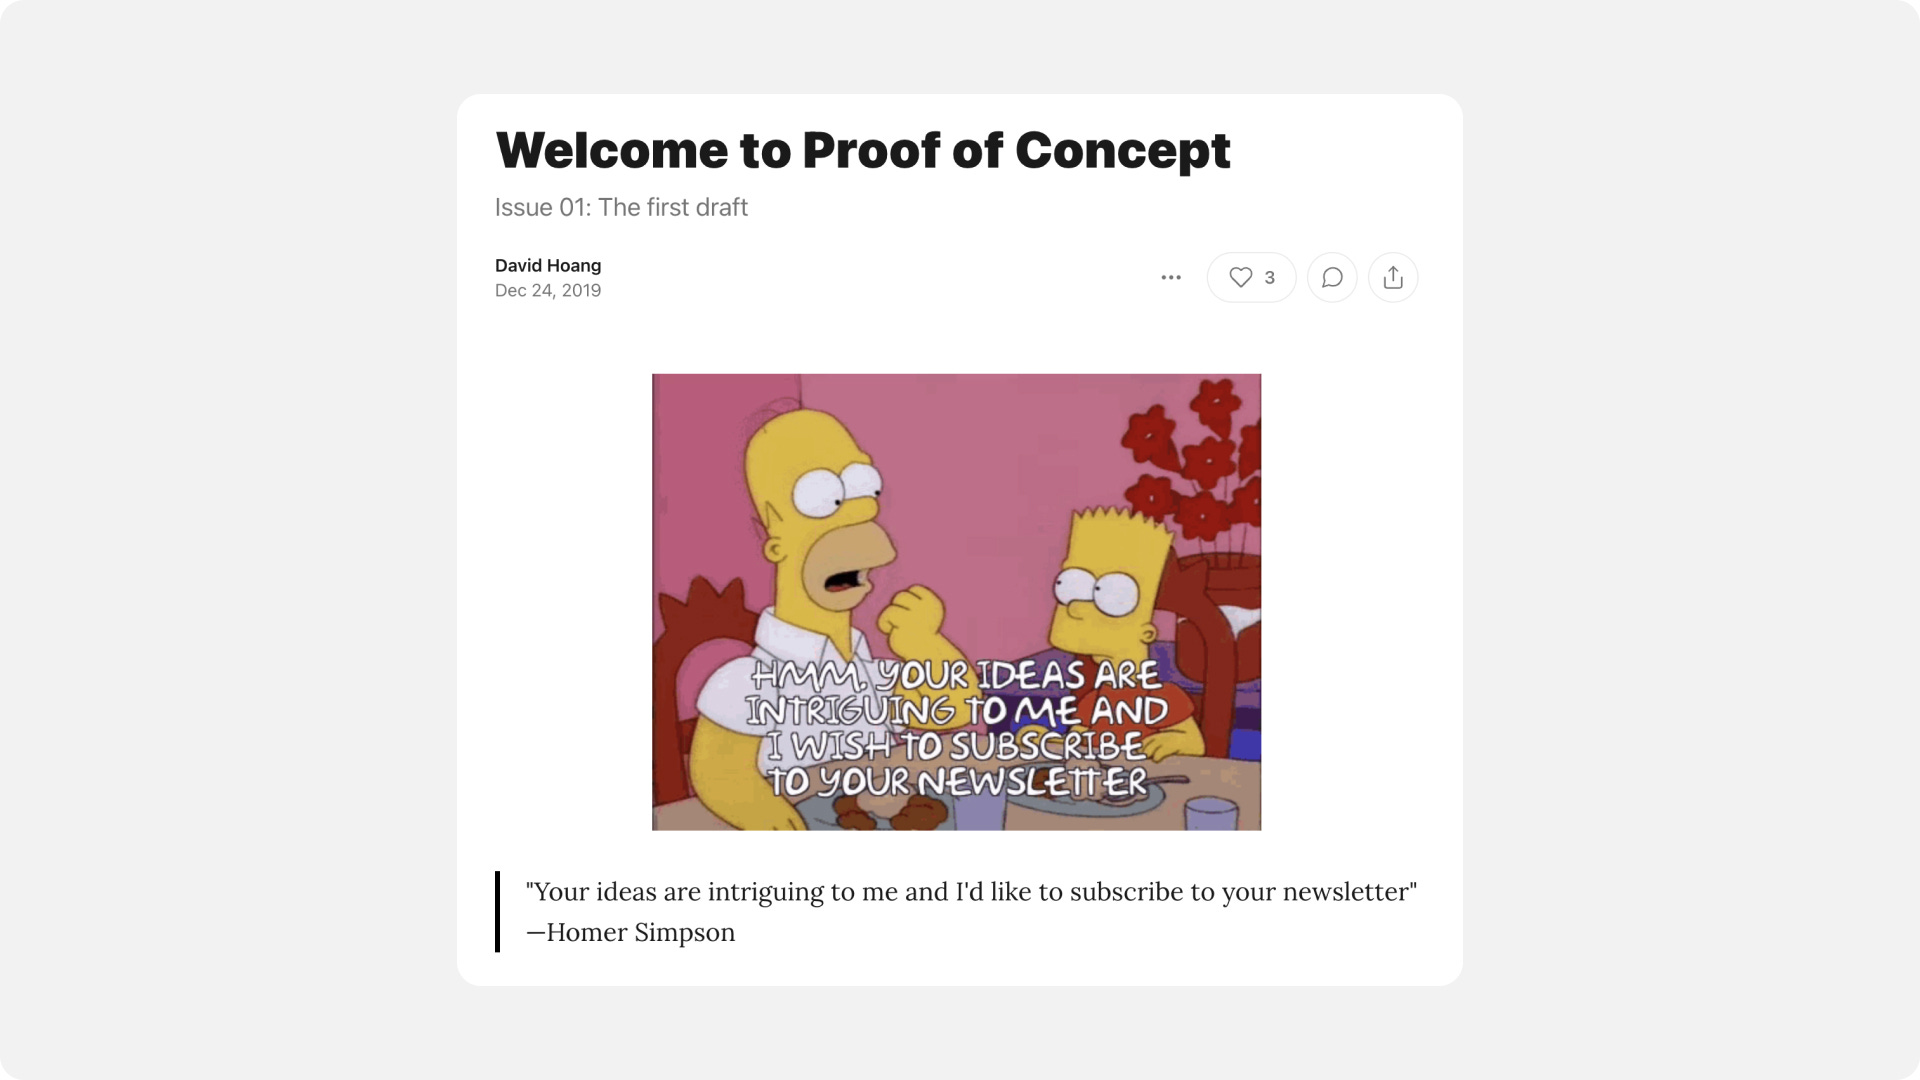 Simpson: Hmm, your ideas are intriguing to me and I wish to subscribe to your newsletter